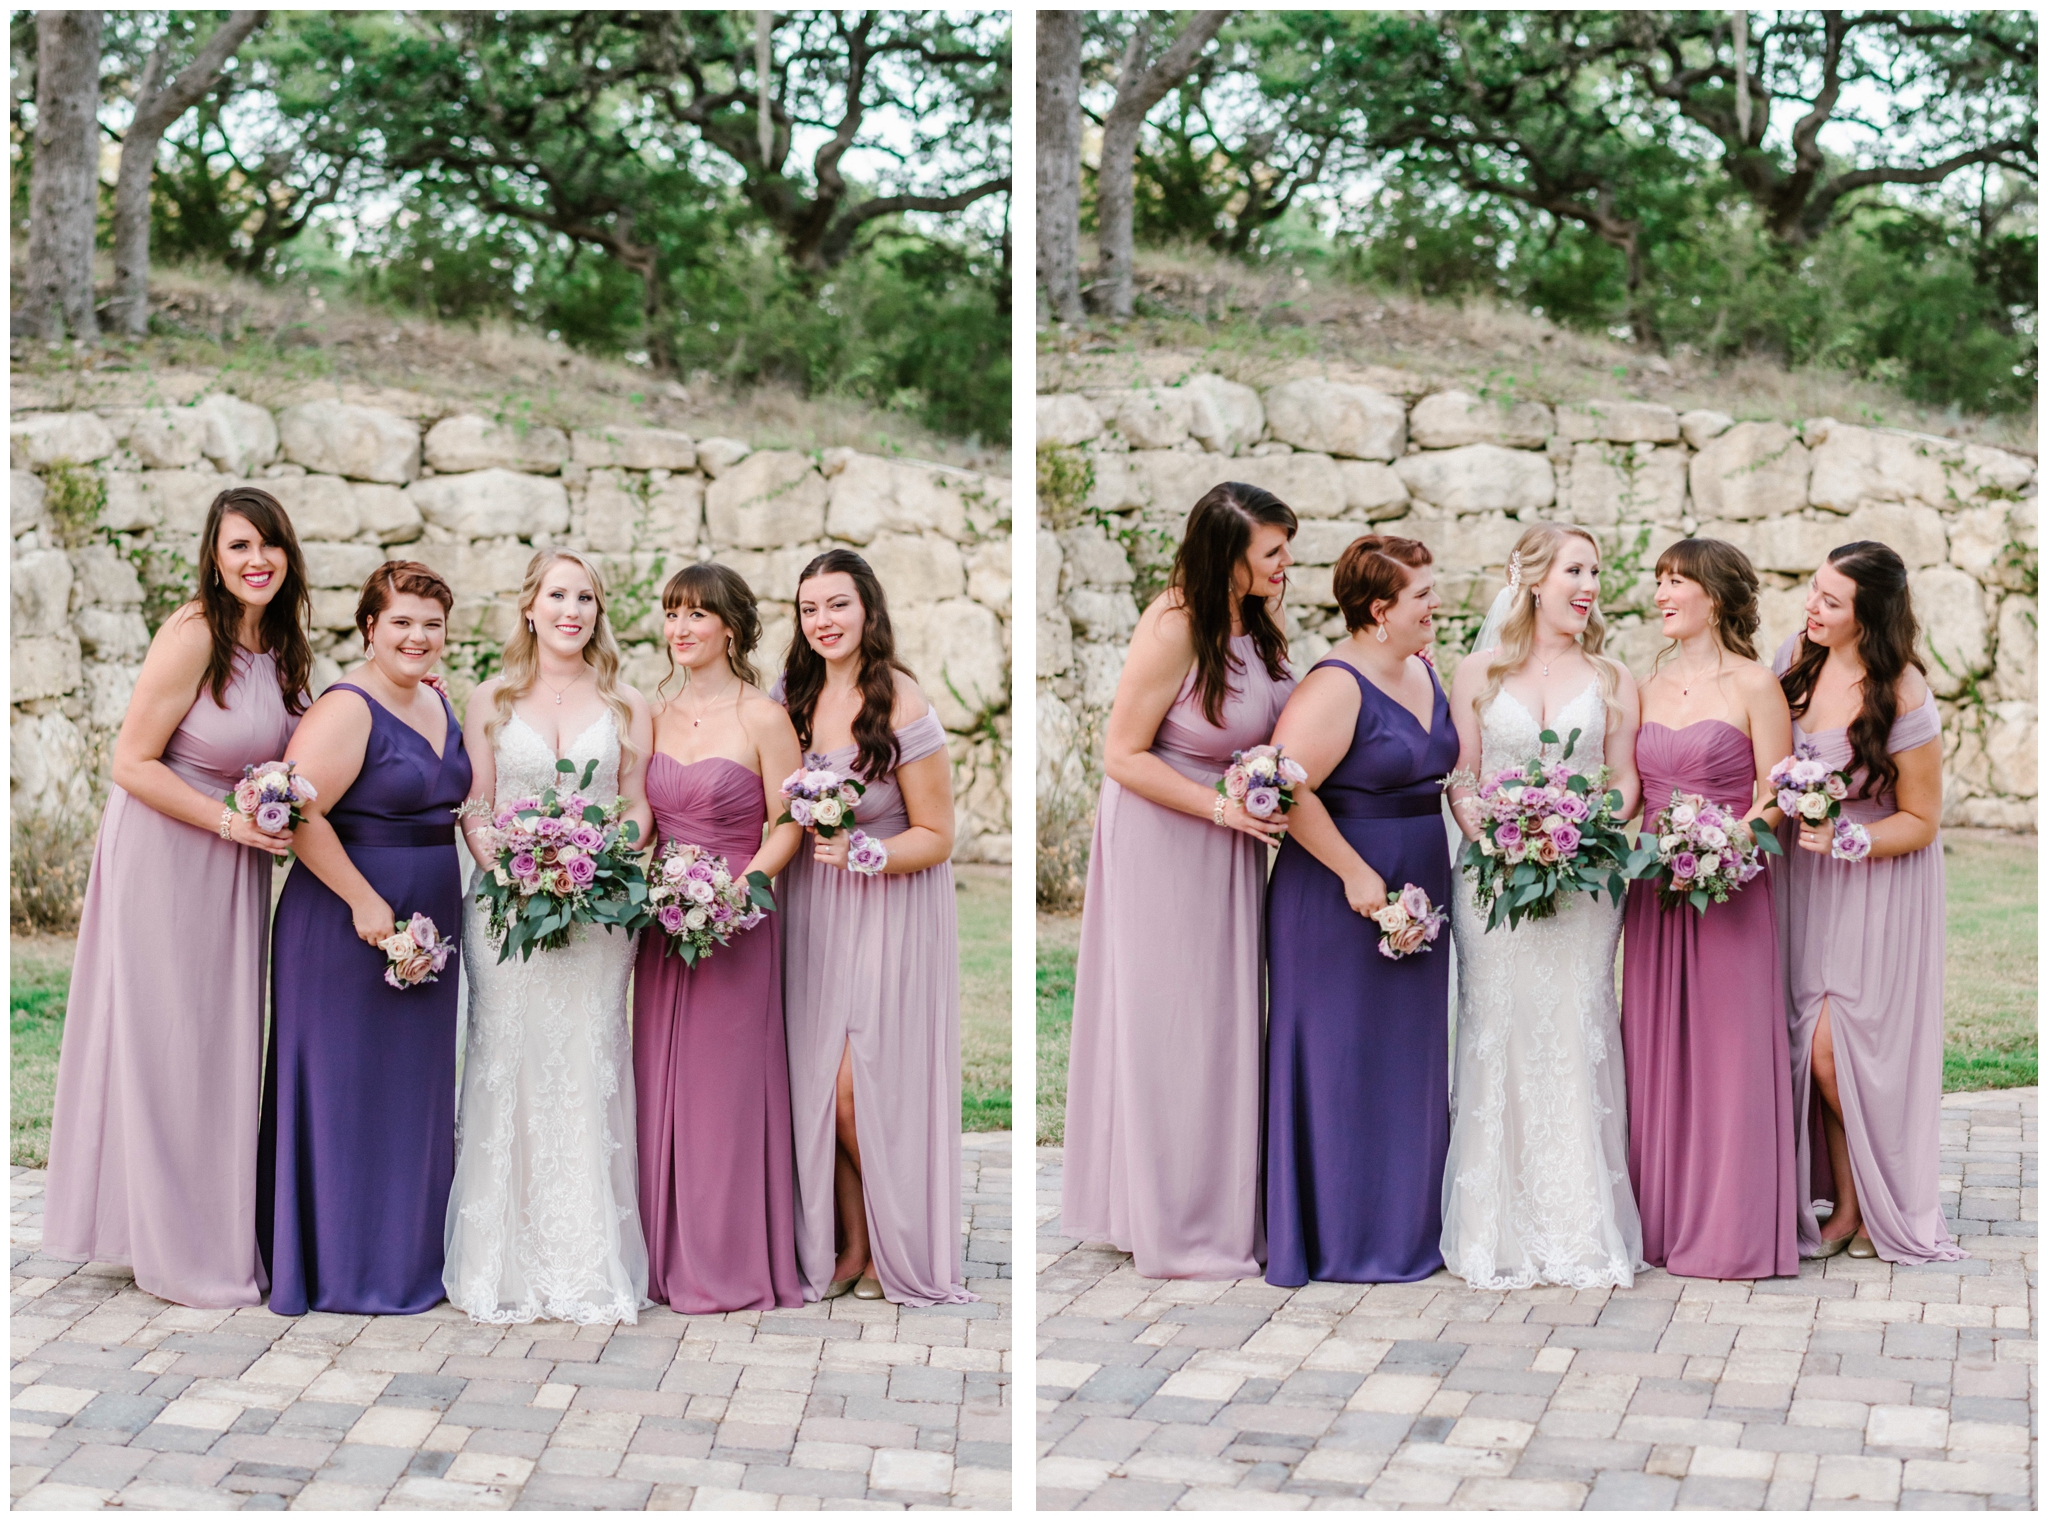 Violet and gold wedding inspiration, with purple bouquets